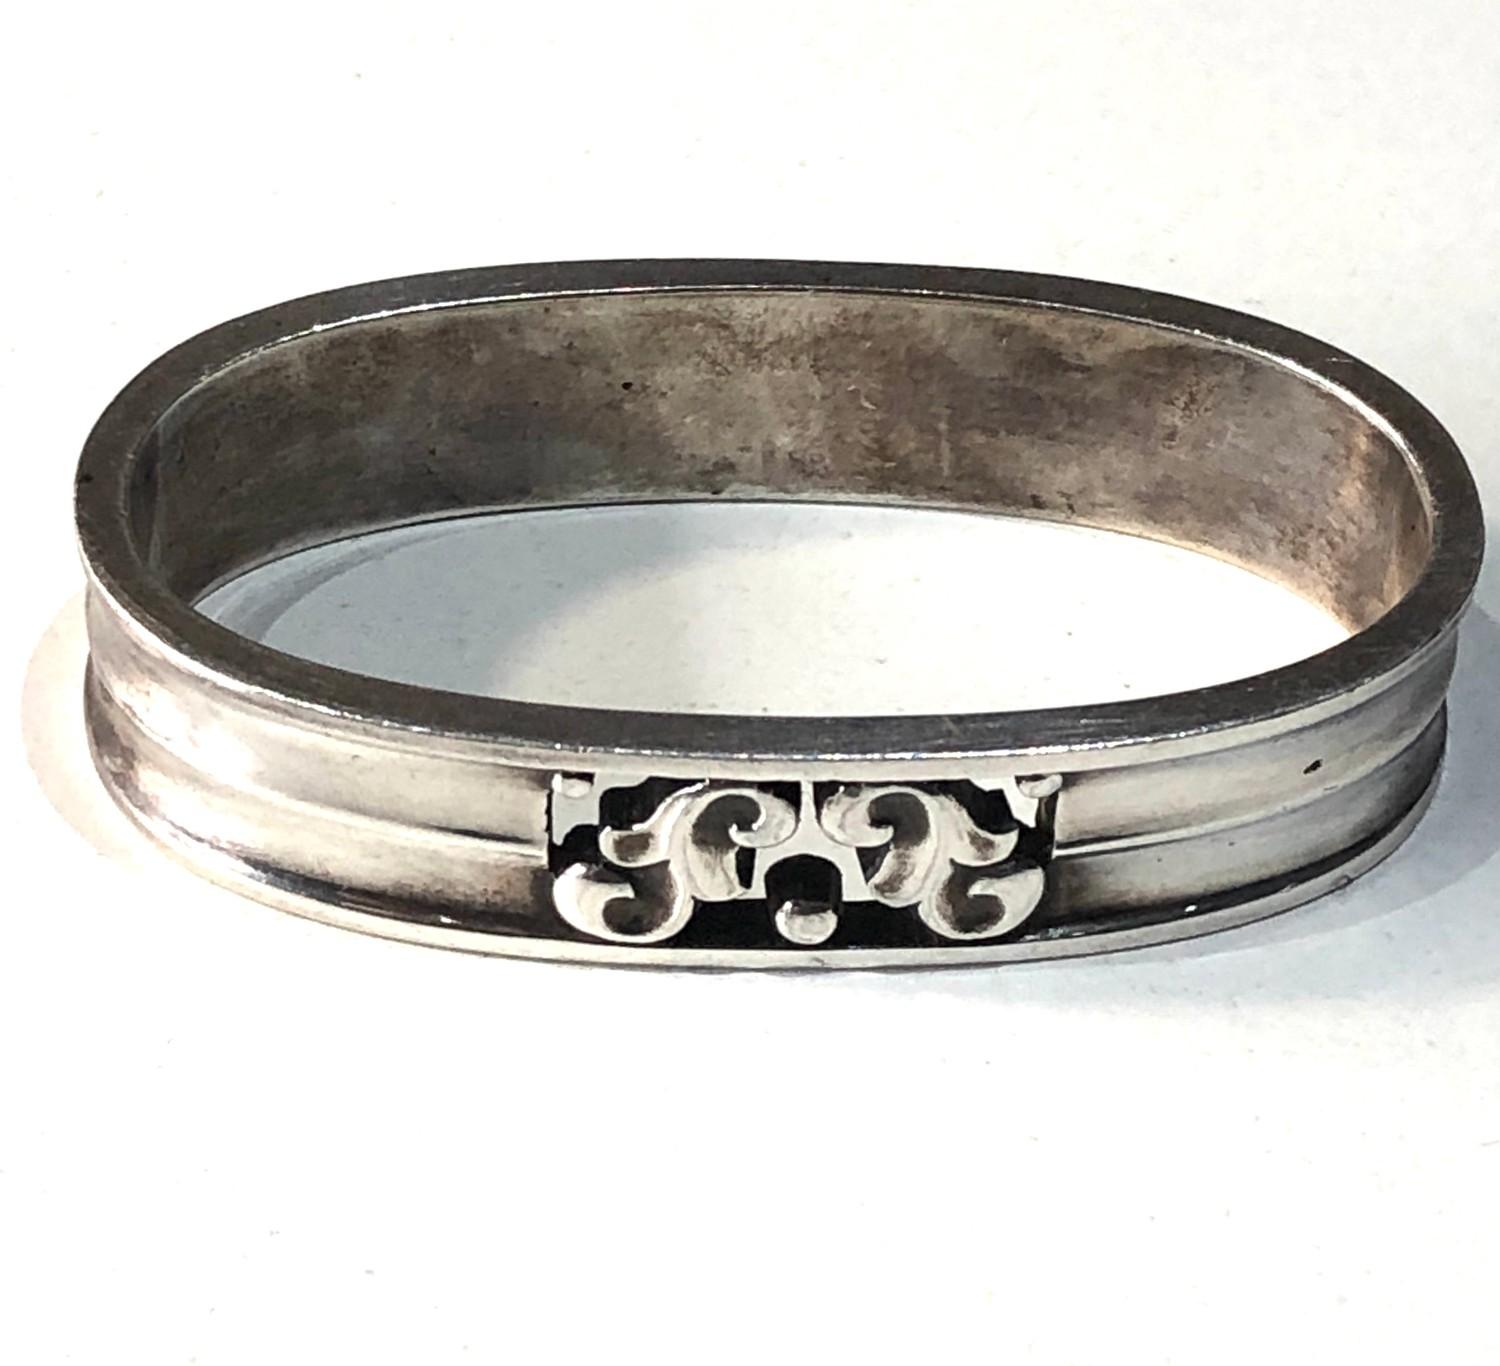 Georg Jensen silver napkin ring No110a in good condition